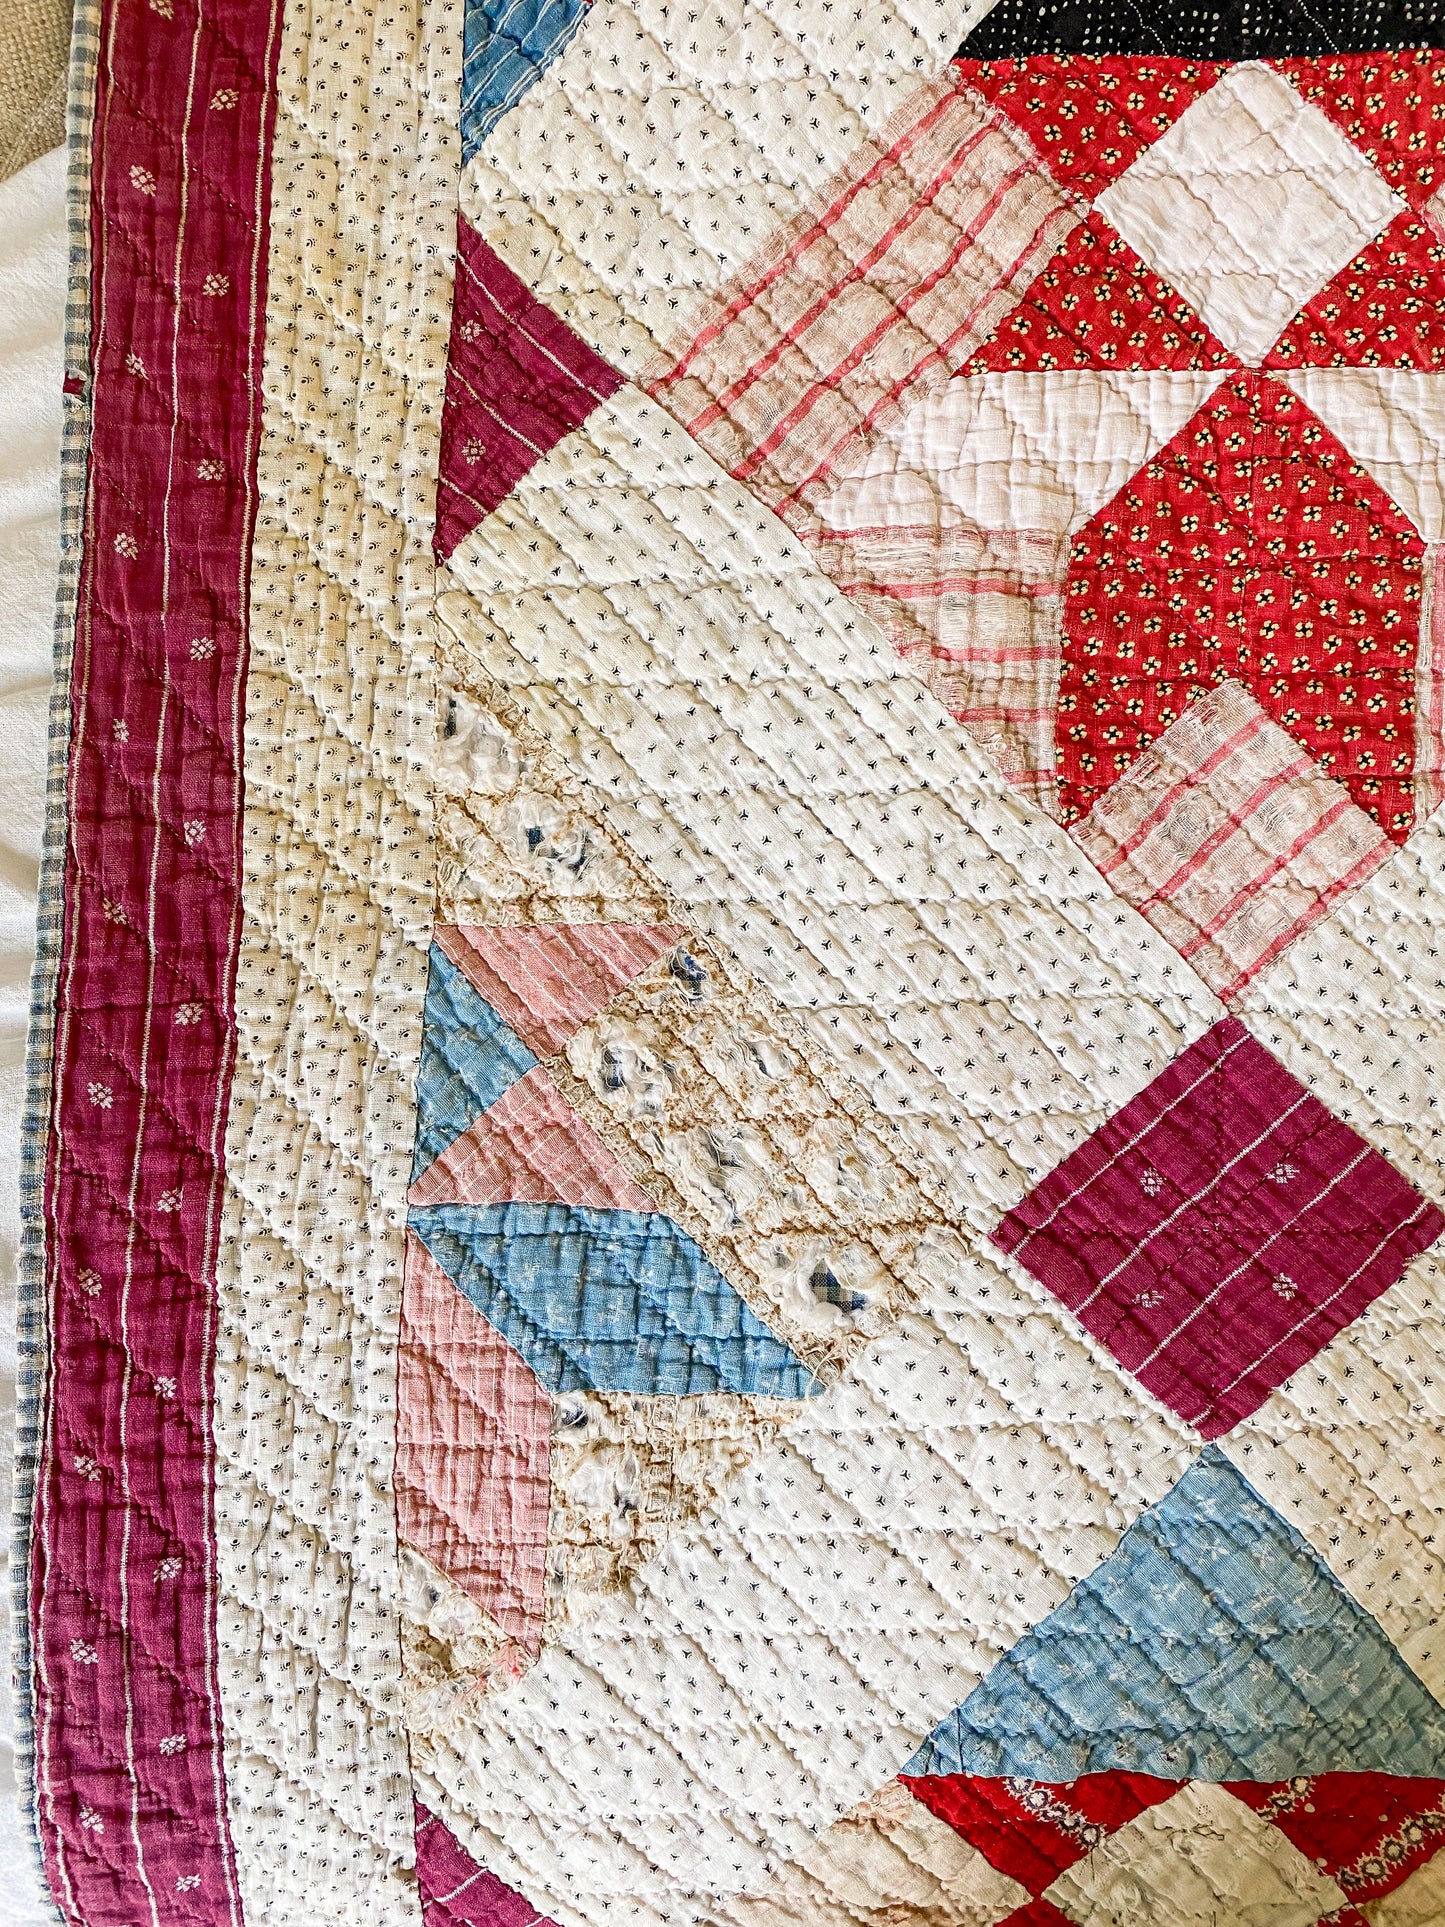 Antique Red and Blue Basket Quilt | Cutter Stacking Quilt